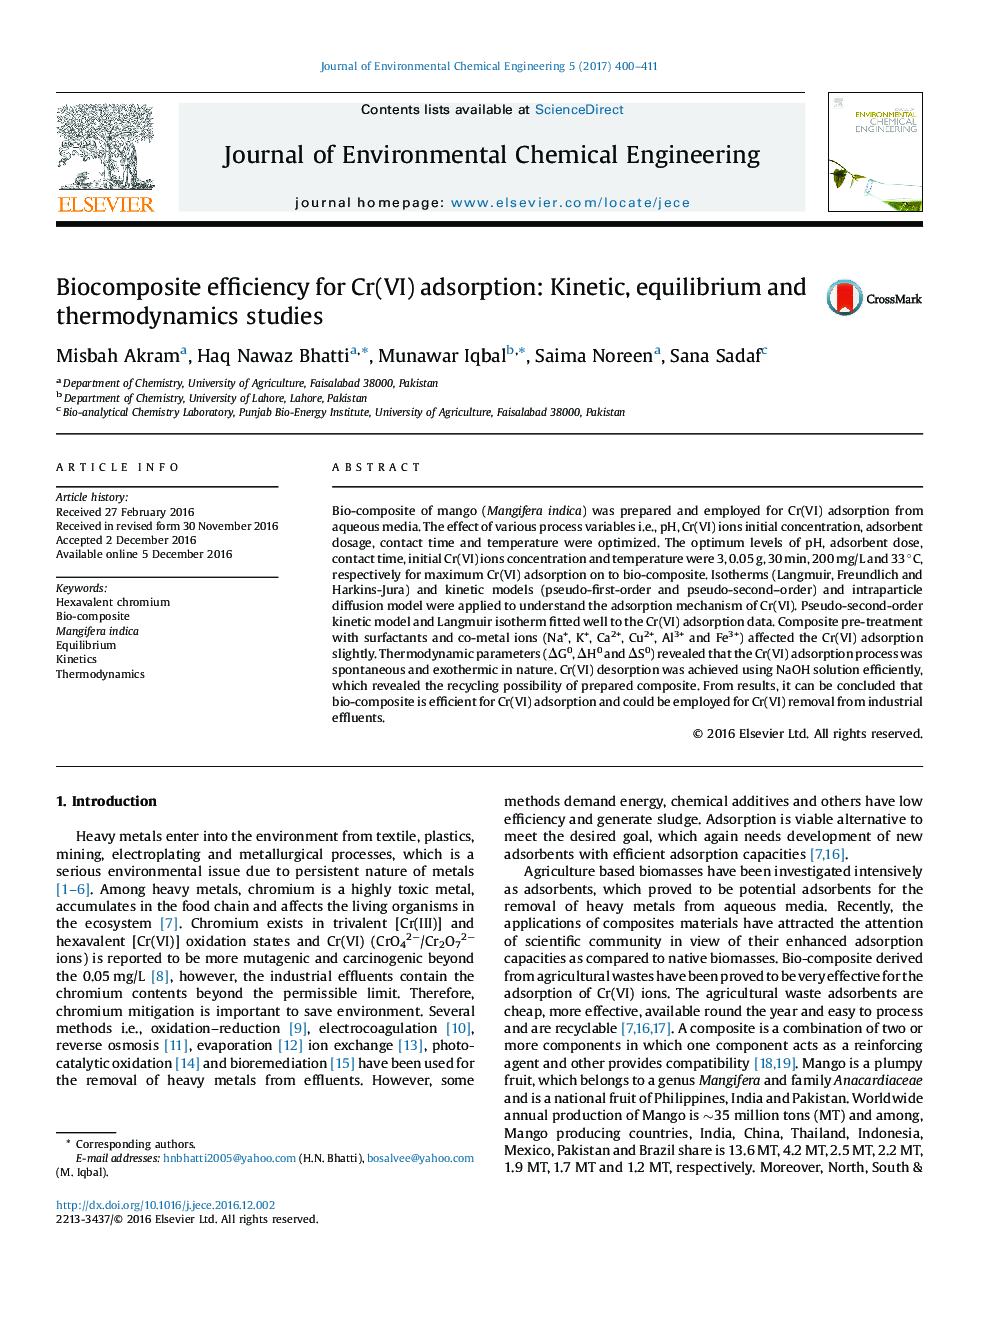 Biocomposite efficiency for Cr(VI) adsorption: Kinetic, equilibrium and thermodynamics studies